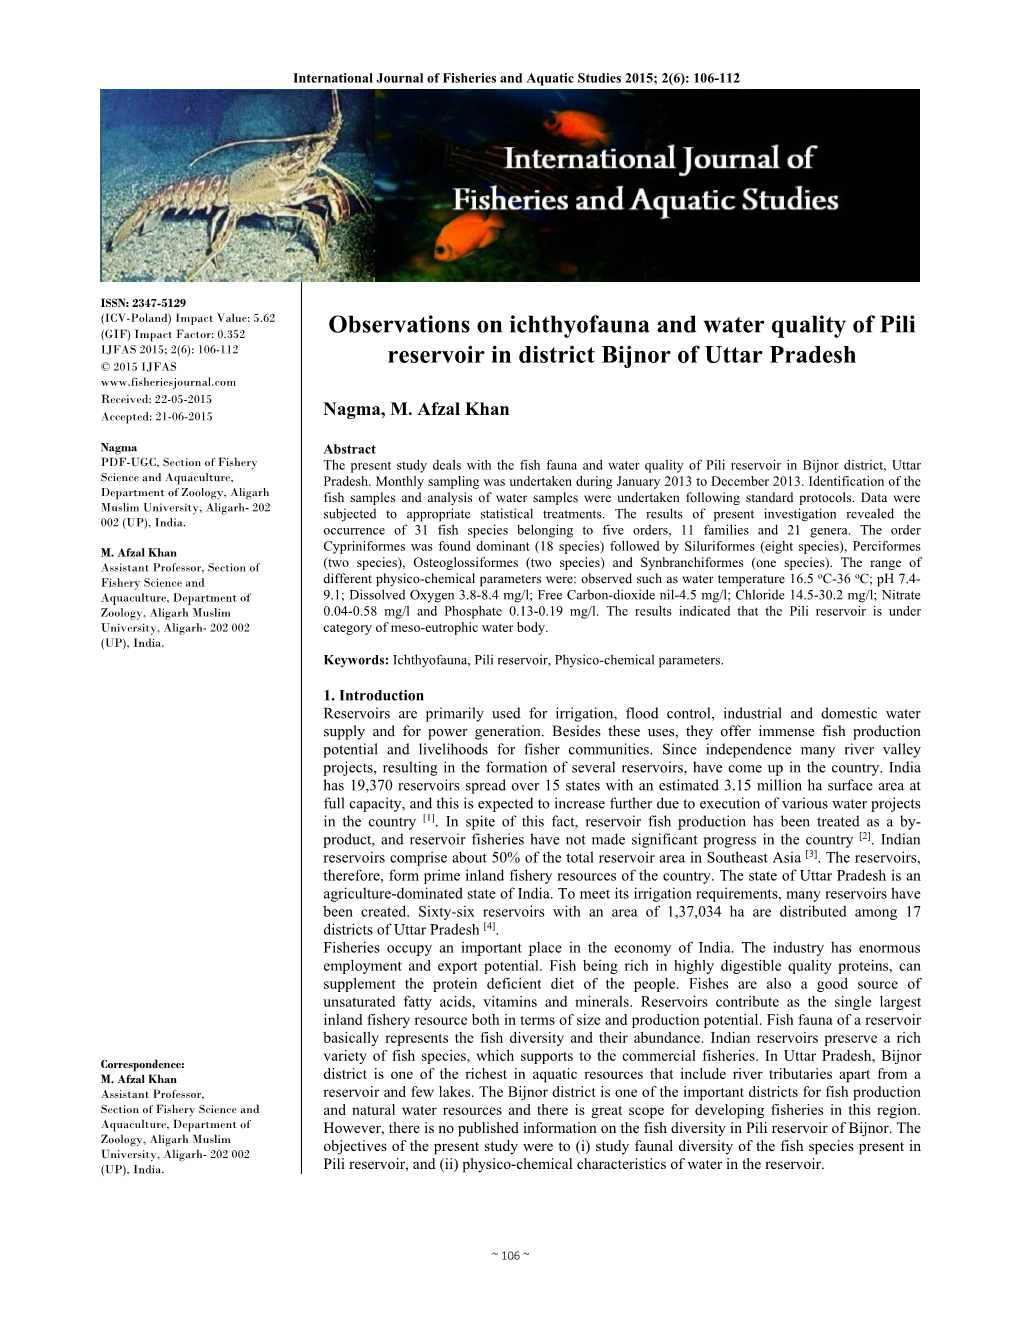 Observations on Ichthyofauna and Water Quality of Pili Reservoir in District Bijnor of Uttar Pradesh